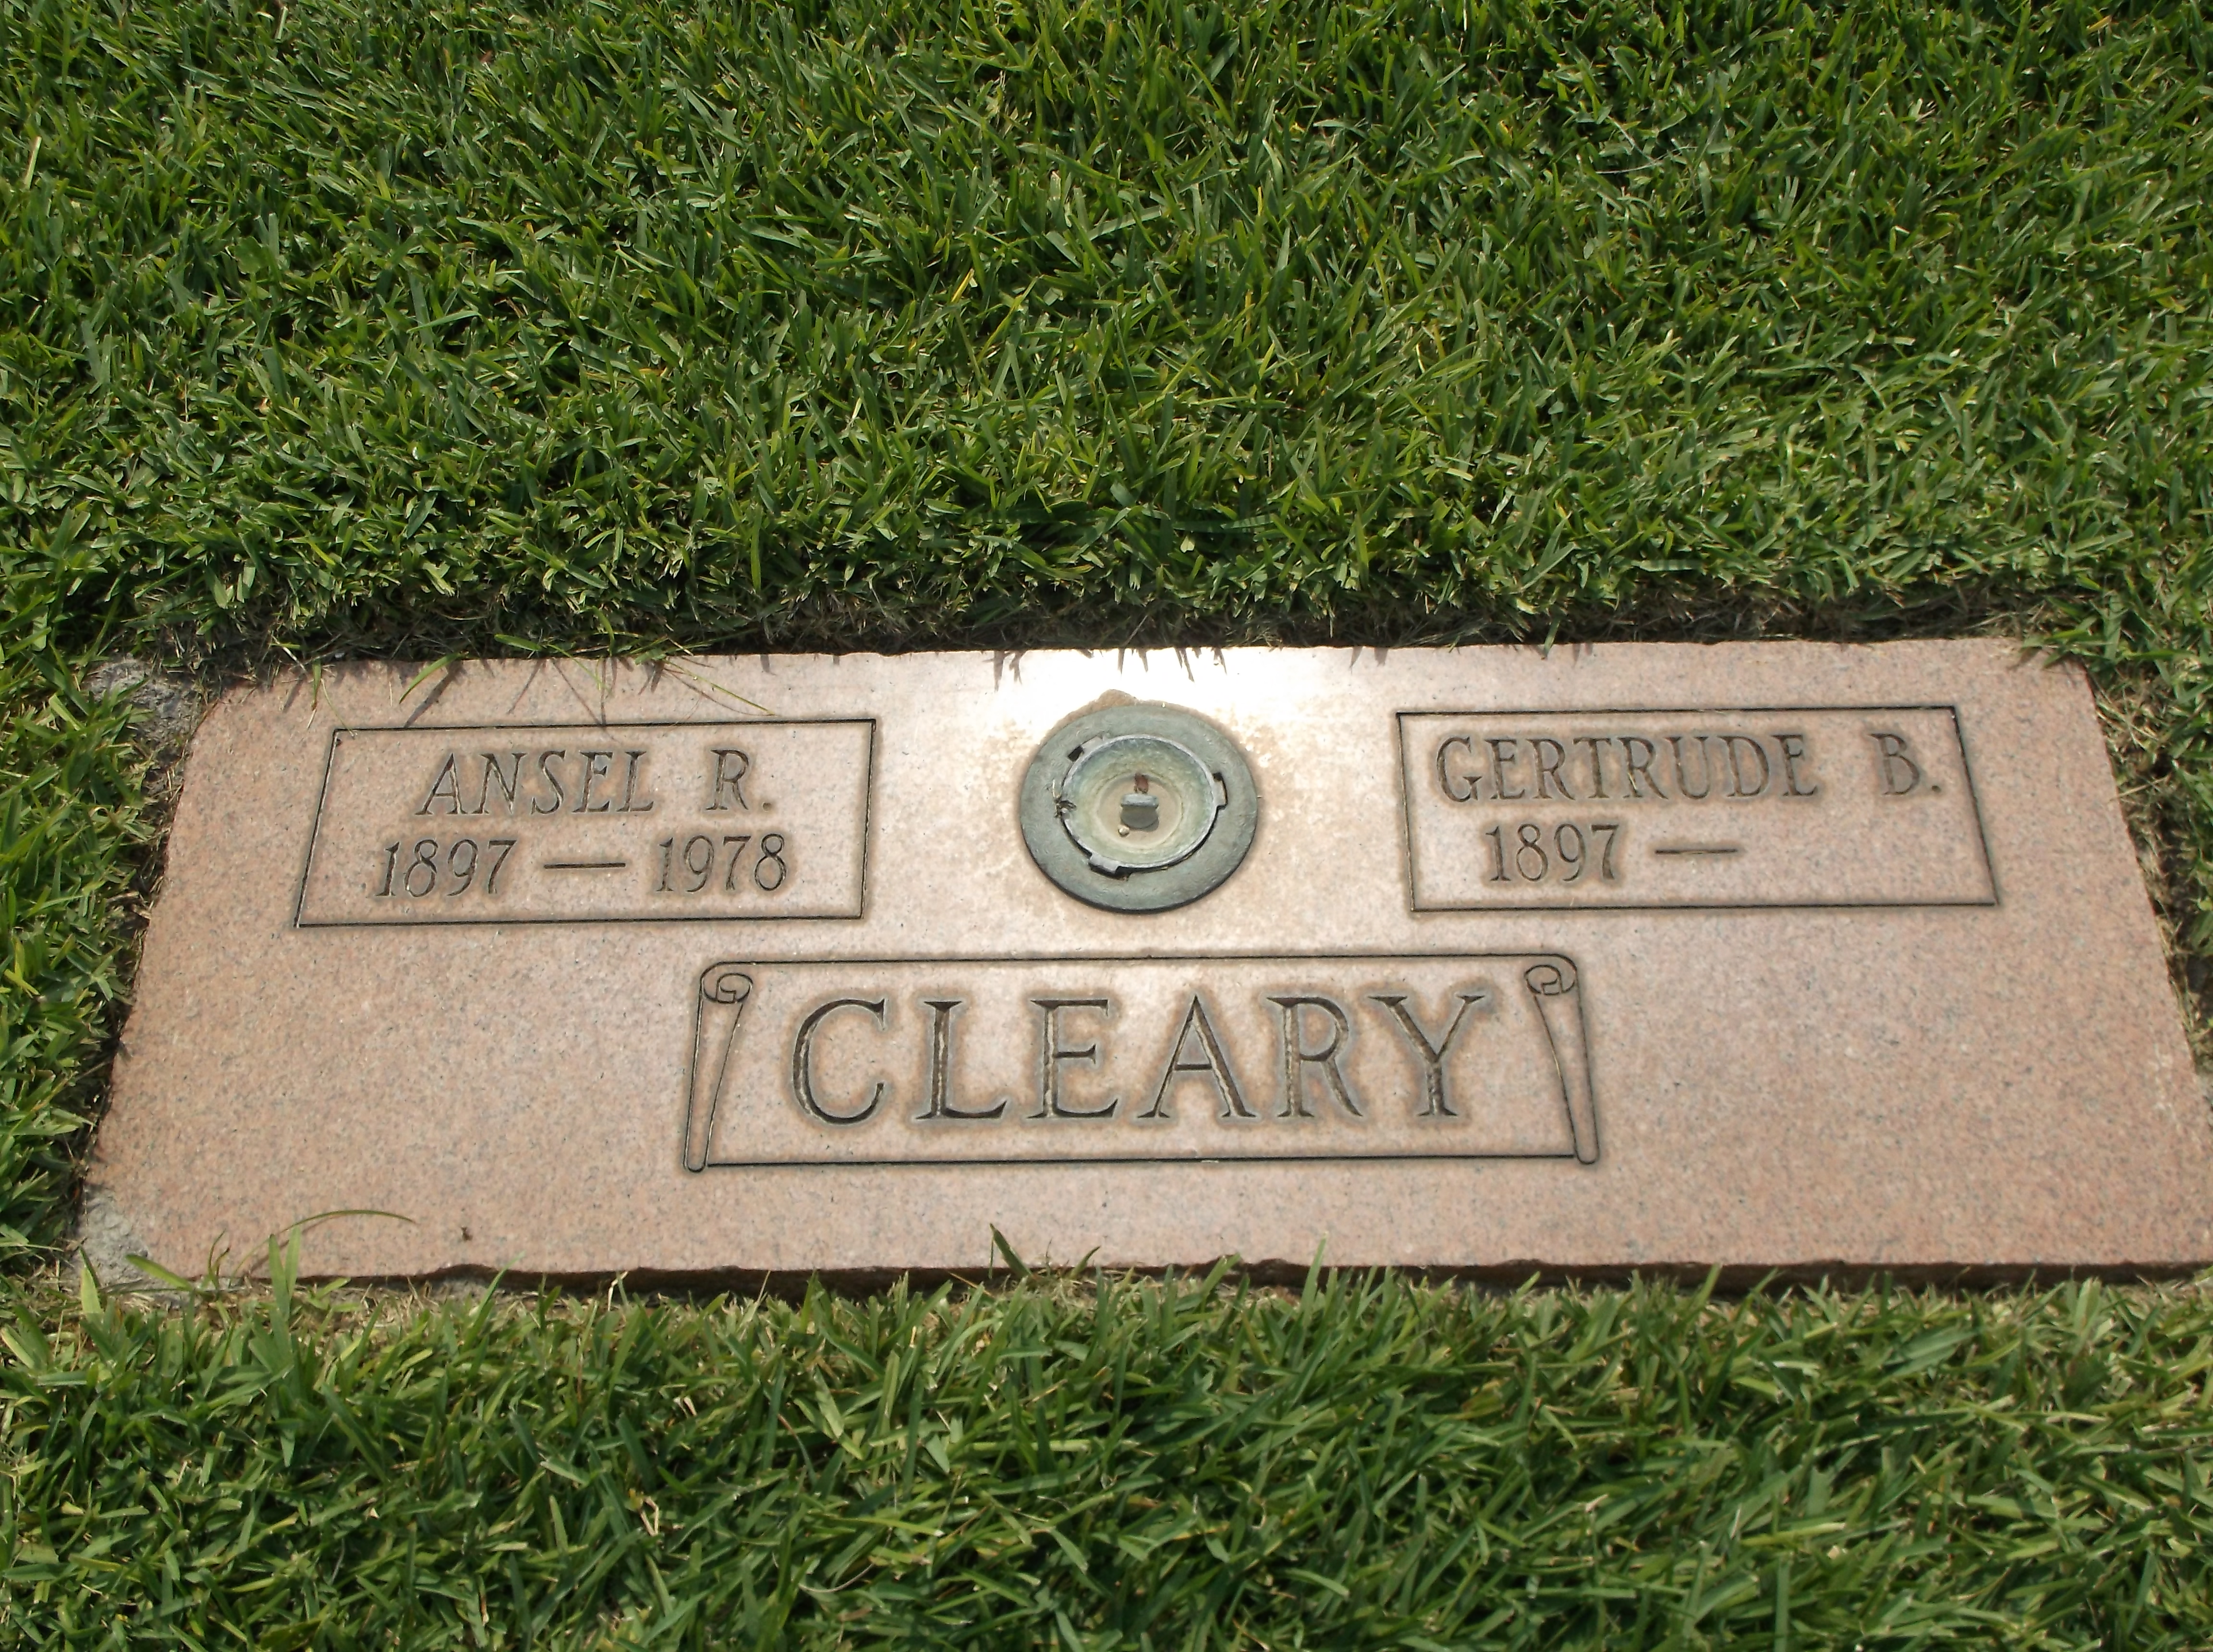 Gertrude B Cleary